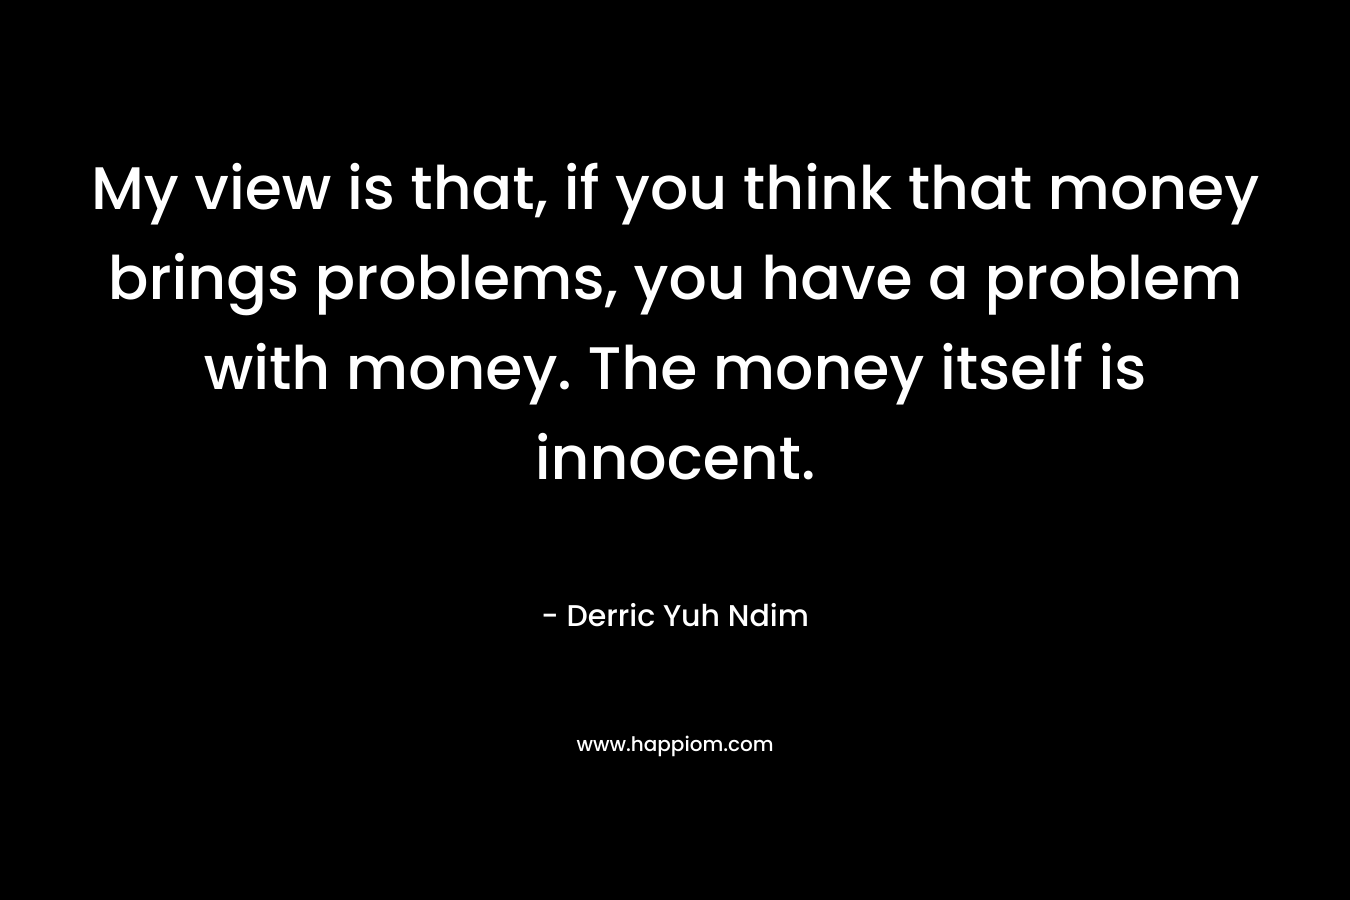 My view is that, if you think that money brings problems, you have a problem with money. The money itself is innocent.